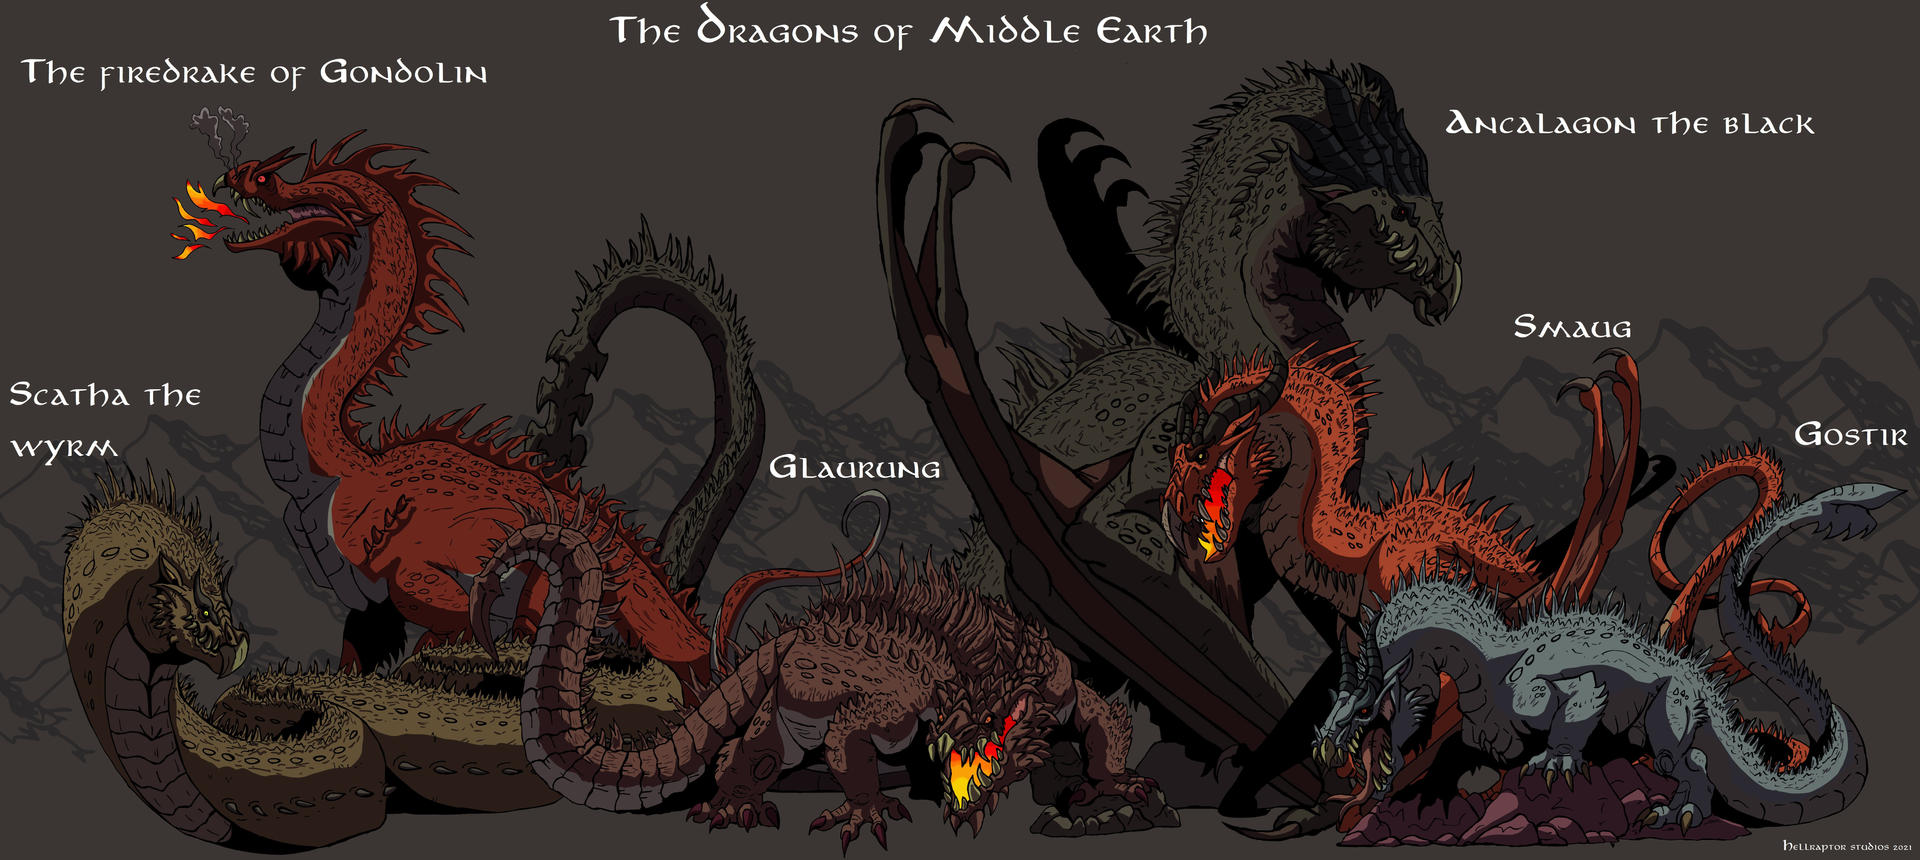 Dragon of Middle Earth by Doomguy26 : r/lotr